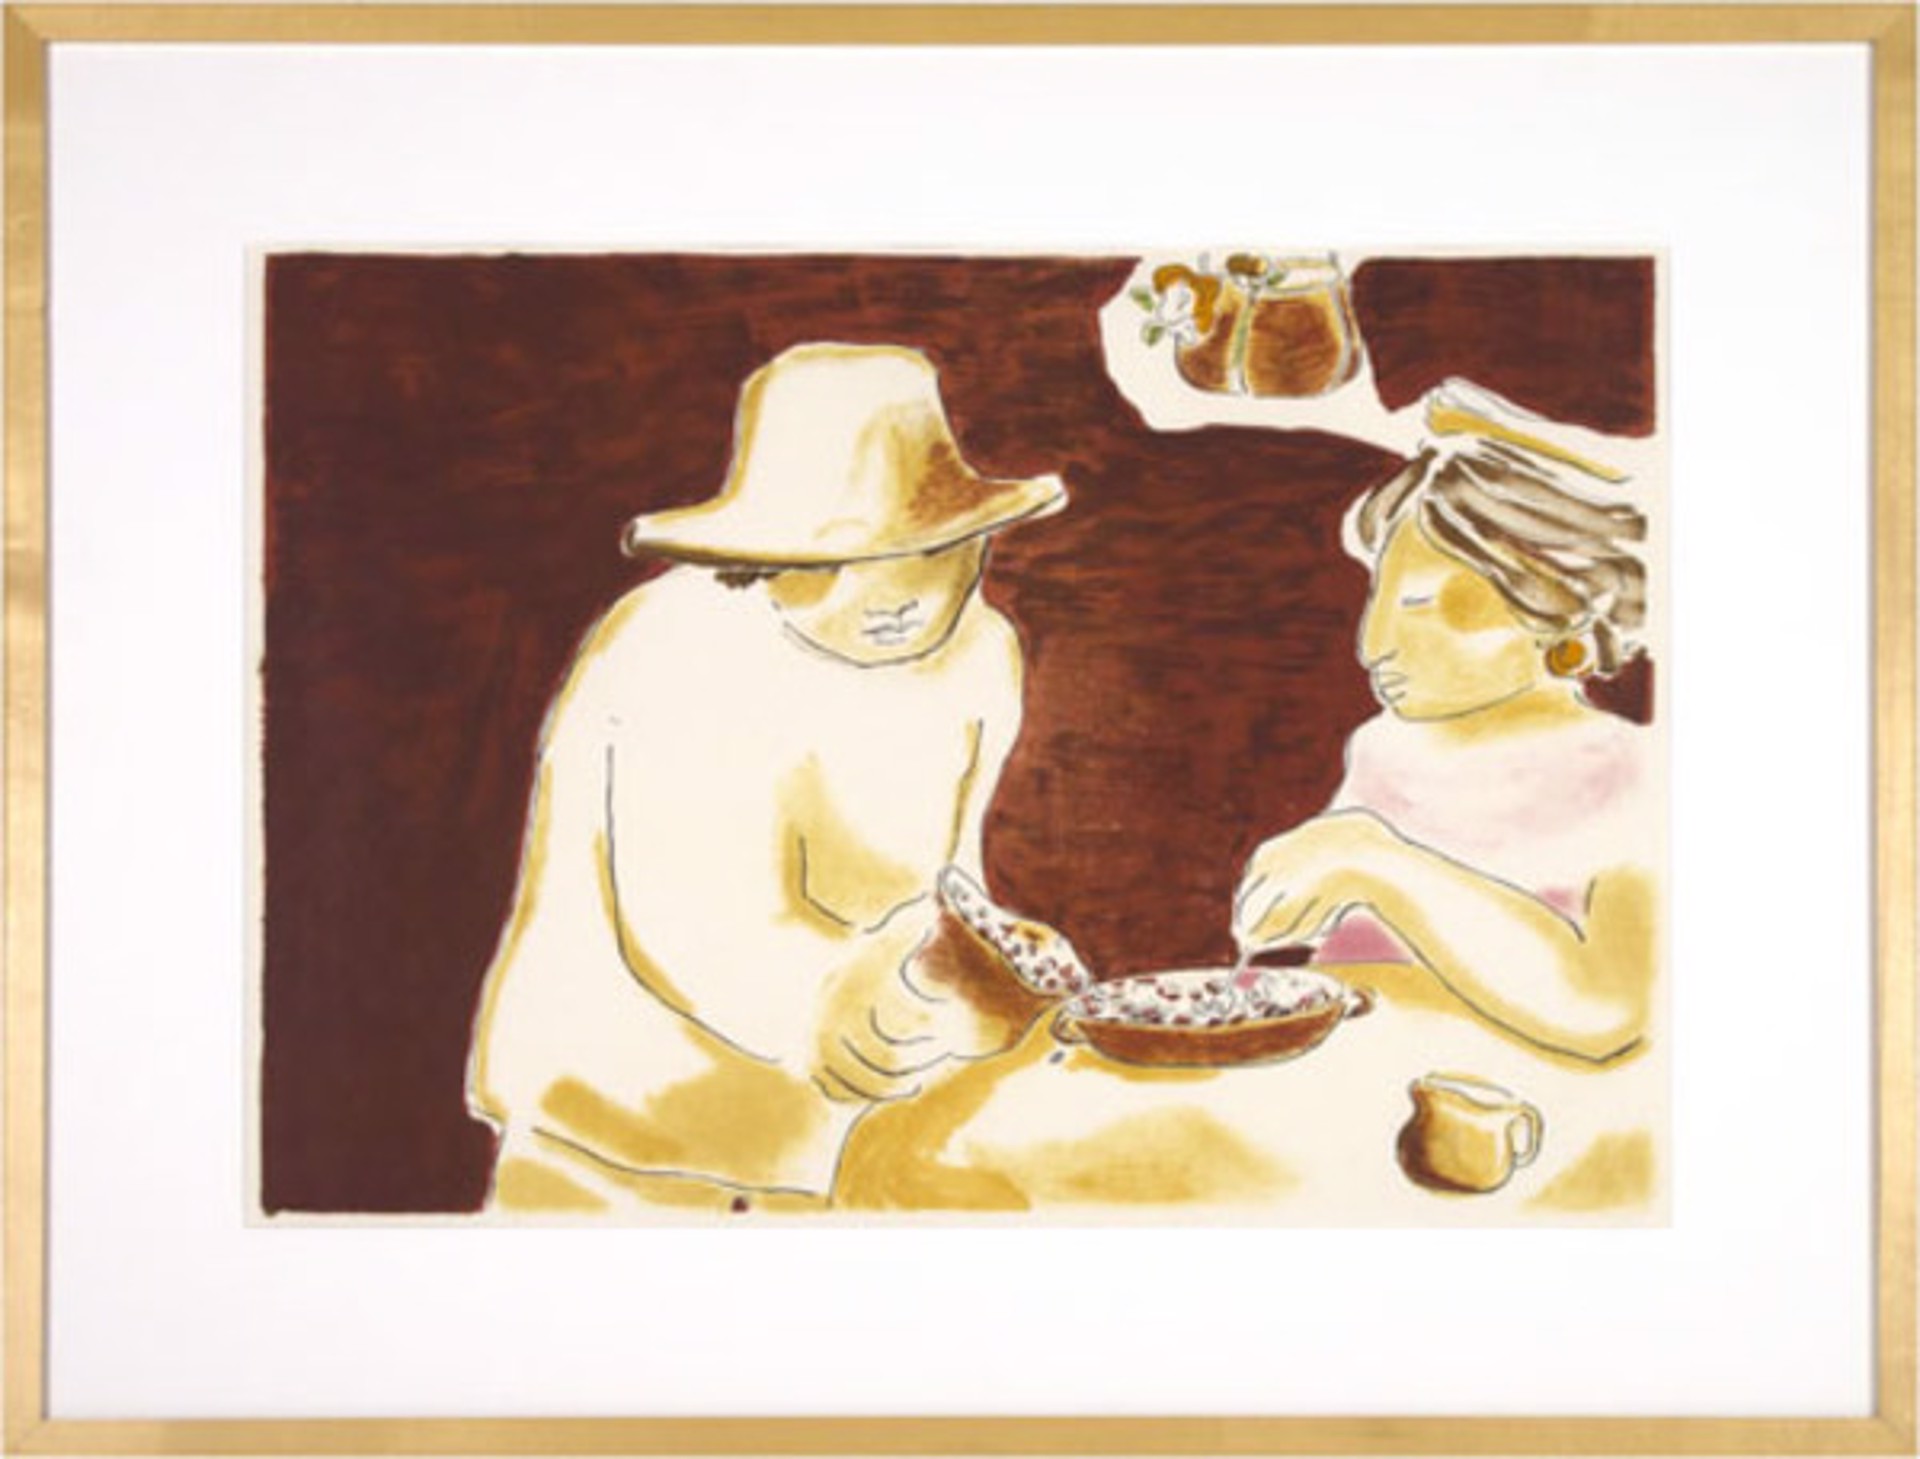 Untitled (2 Women with Beans) by Angelika Thusius